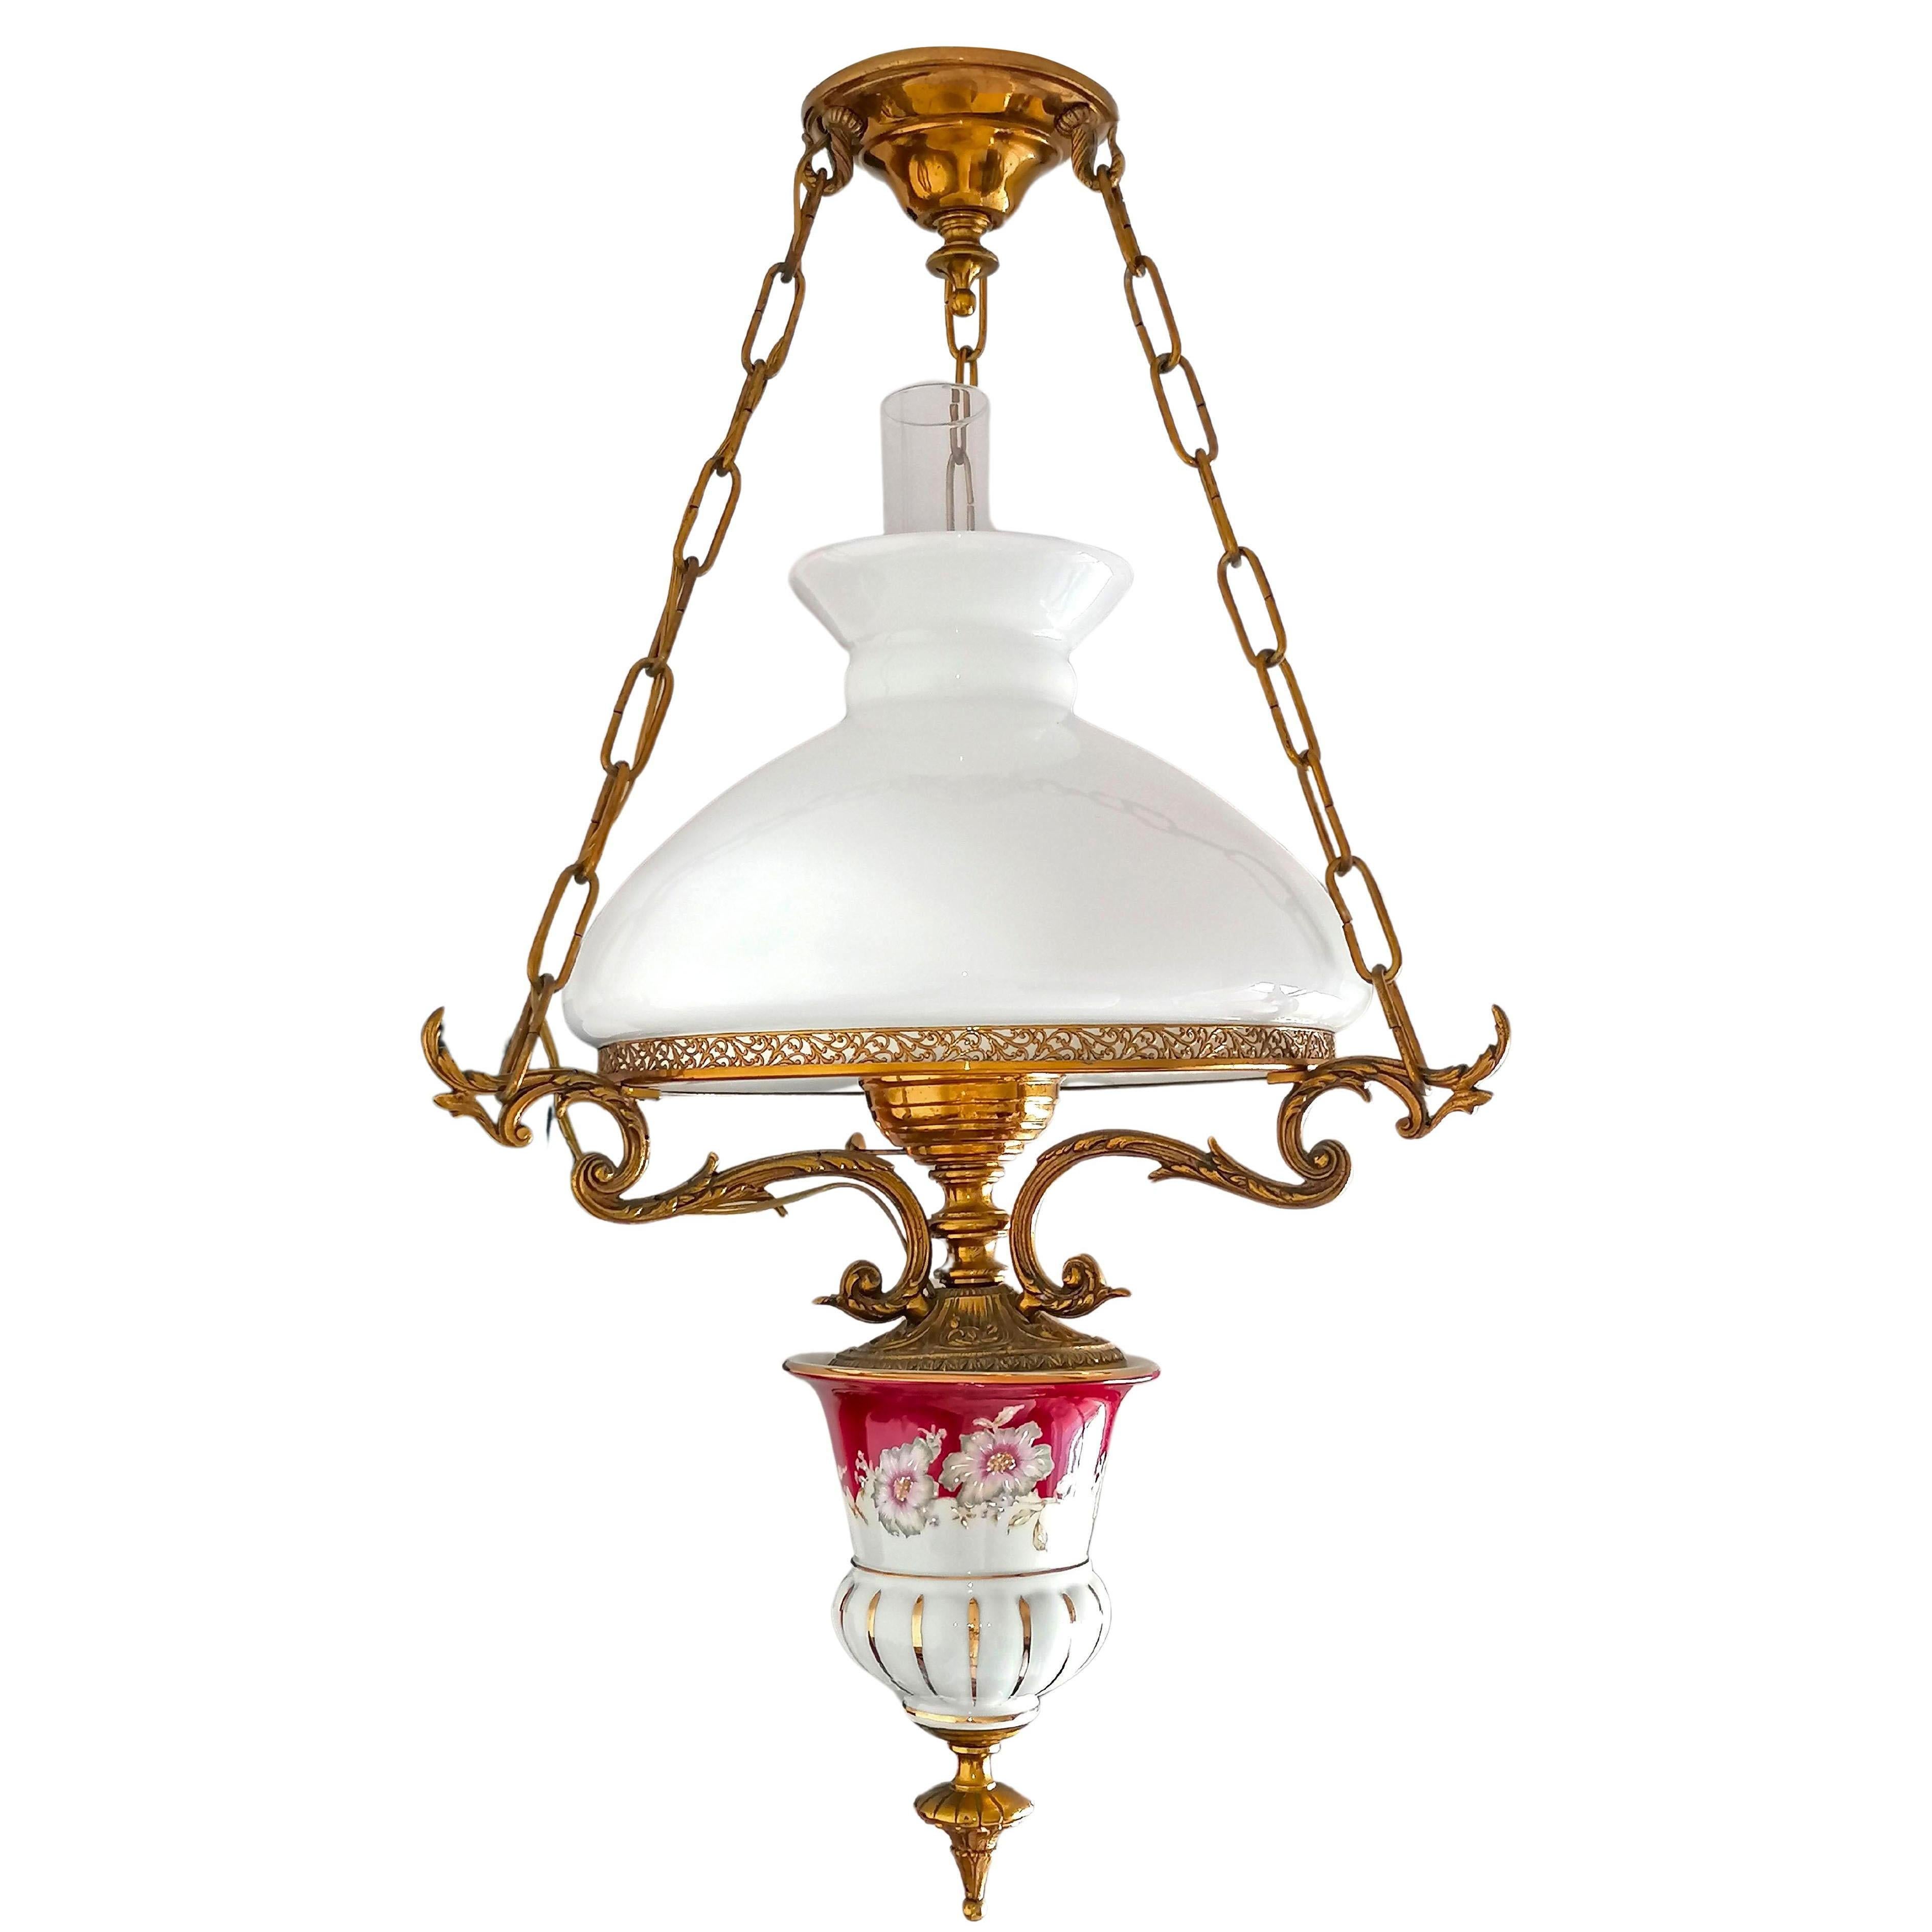 Pair of Large French Chandelier Oil Lamp in Red Pink Porcelain and Gilt Bronze In Good Condition For Sale In Coimbra, PT